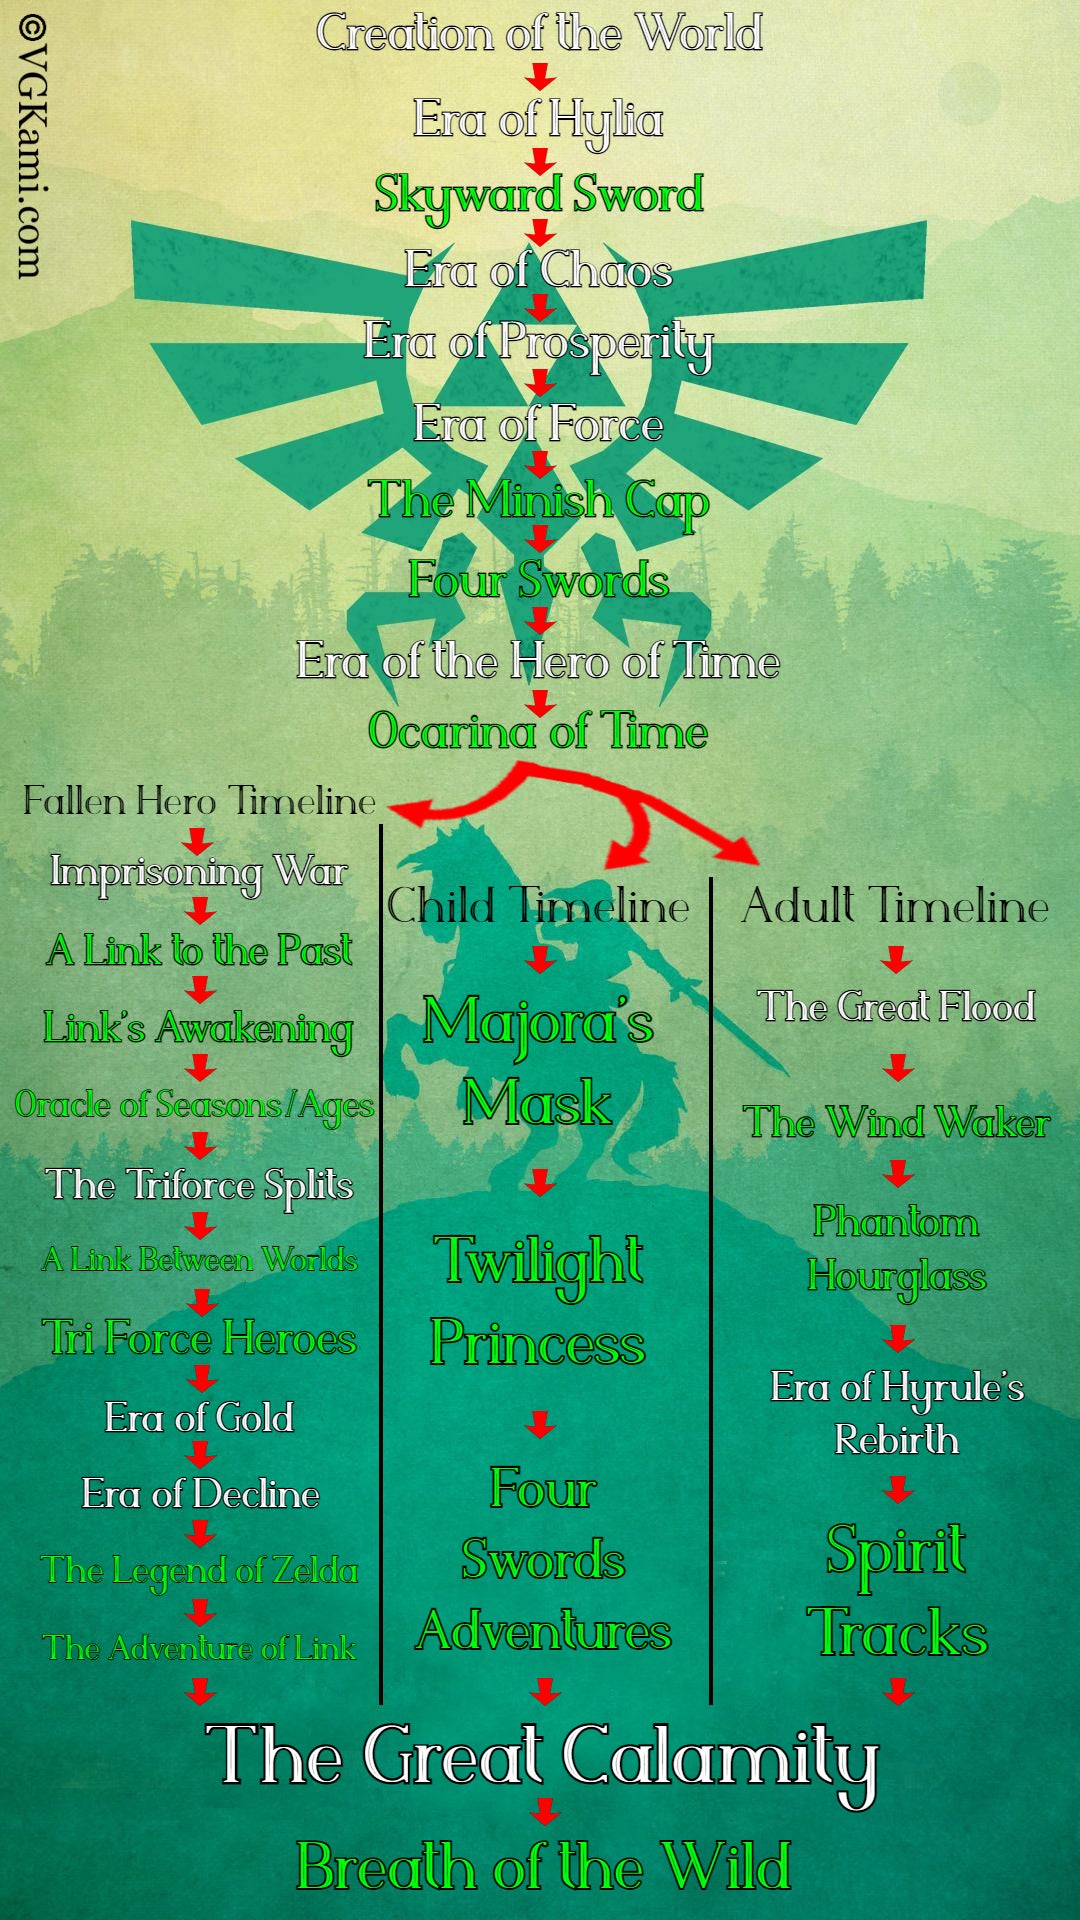 A chart with all main series Legend of Zelda games, eras, and timeline splits in chronological order over a green background.